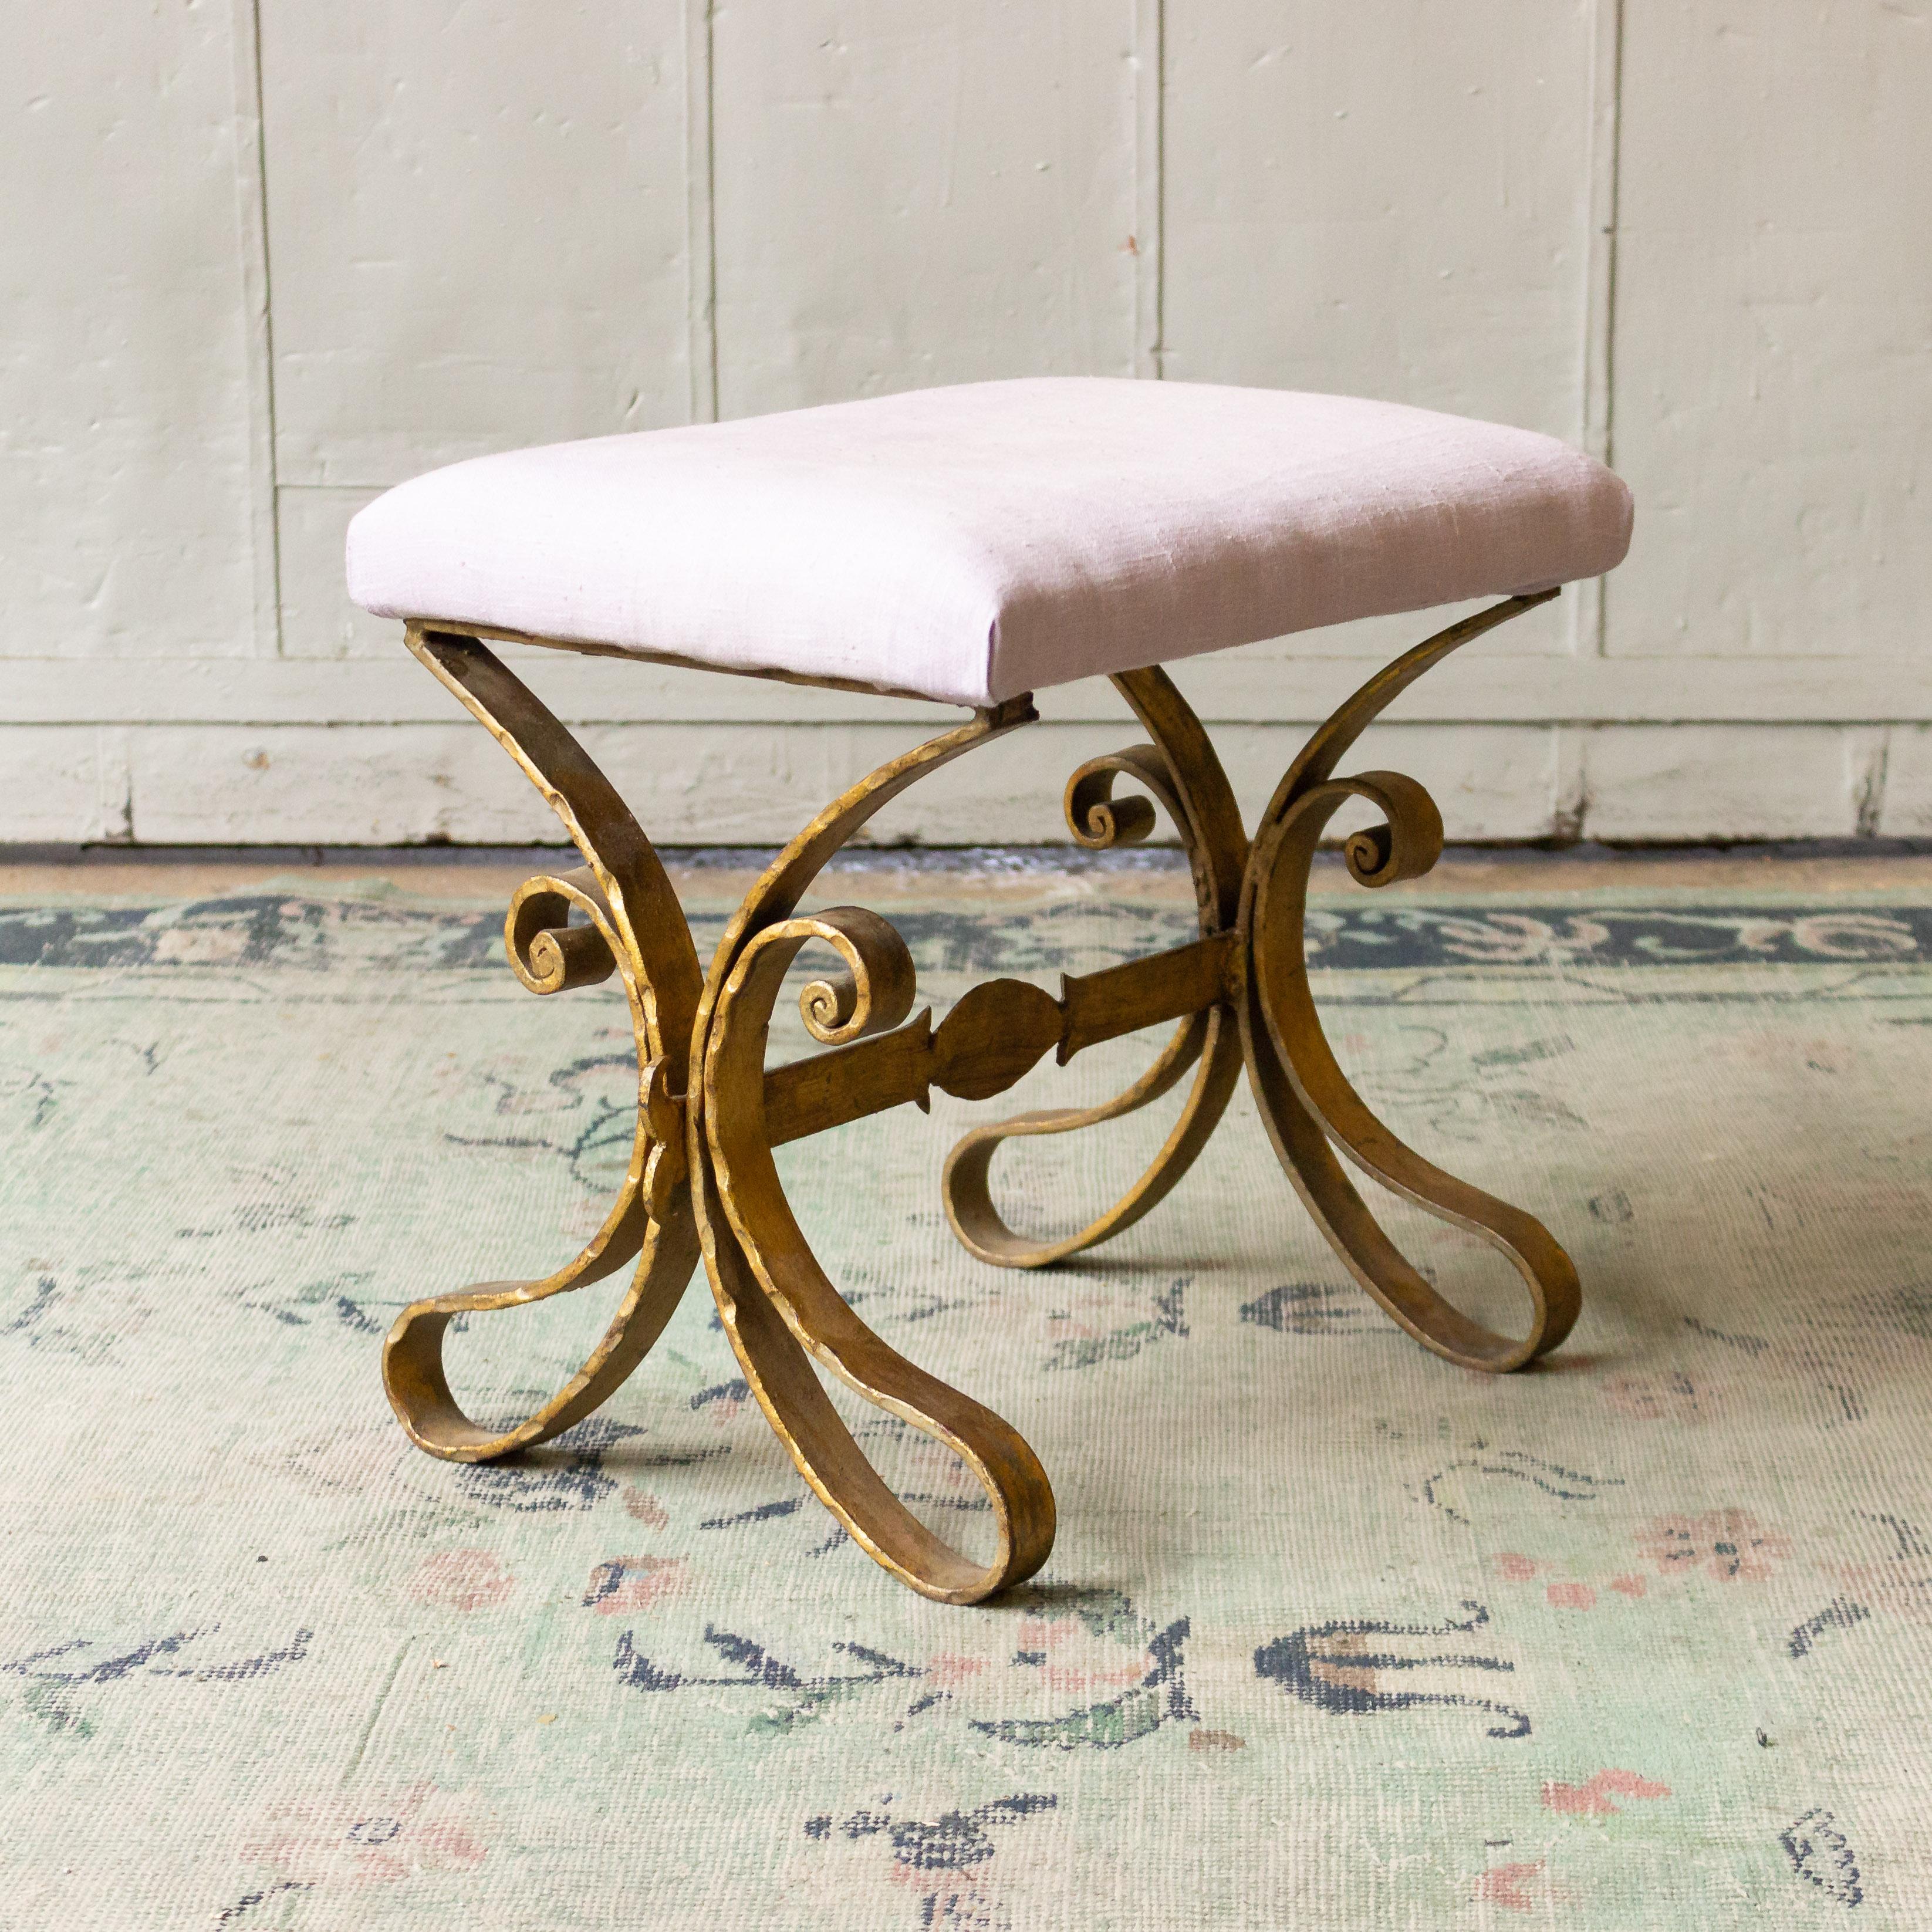 A unique Spanish gilt iron bench with an ornate base. Add a vintage touch to your space with this exquisite small gilt iron bench from Spain. Dating back to the 1950s, the ornate base adds an extra level of detail that makes it truly one-of-a-kind.